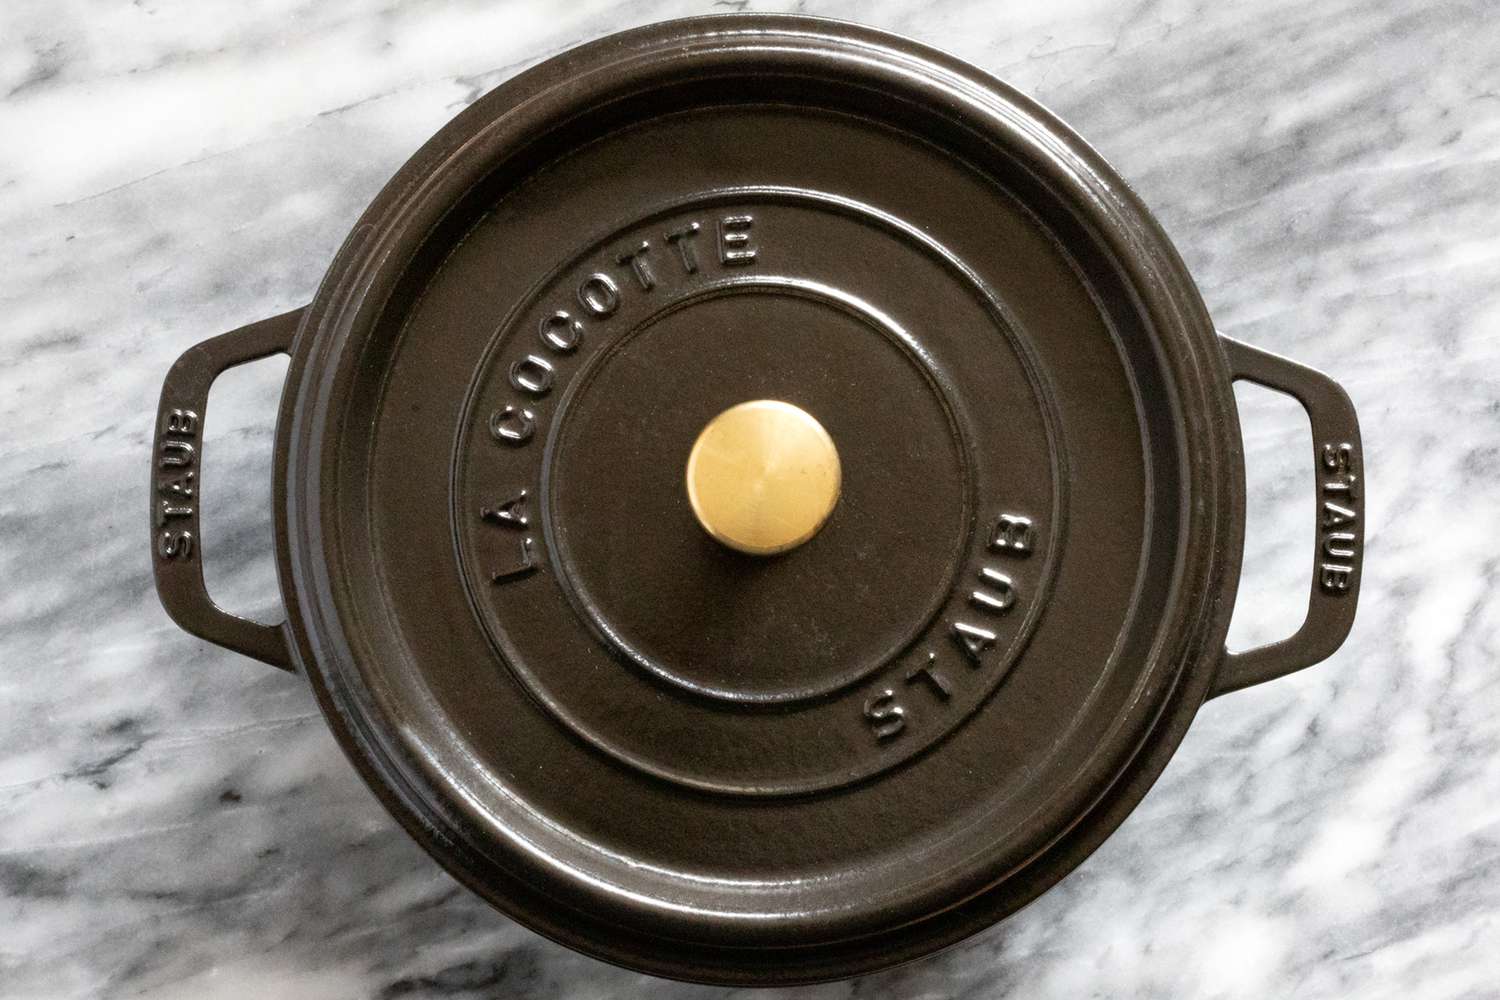 Dutch oven with metal knob